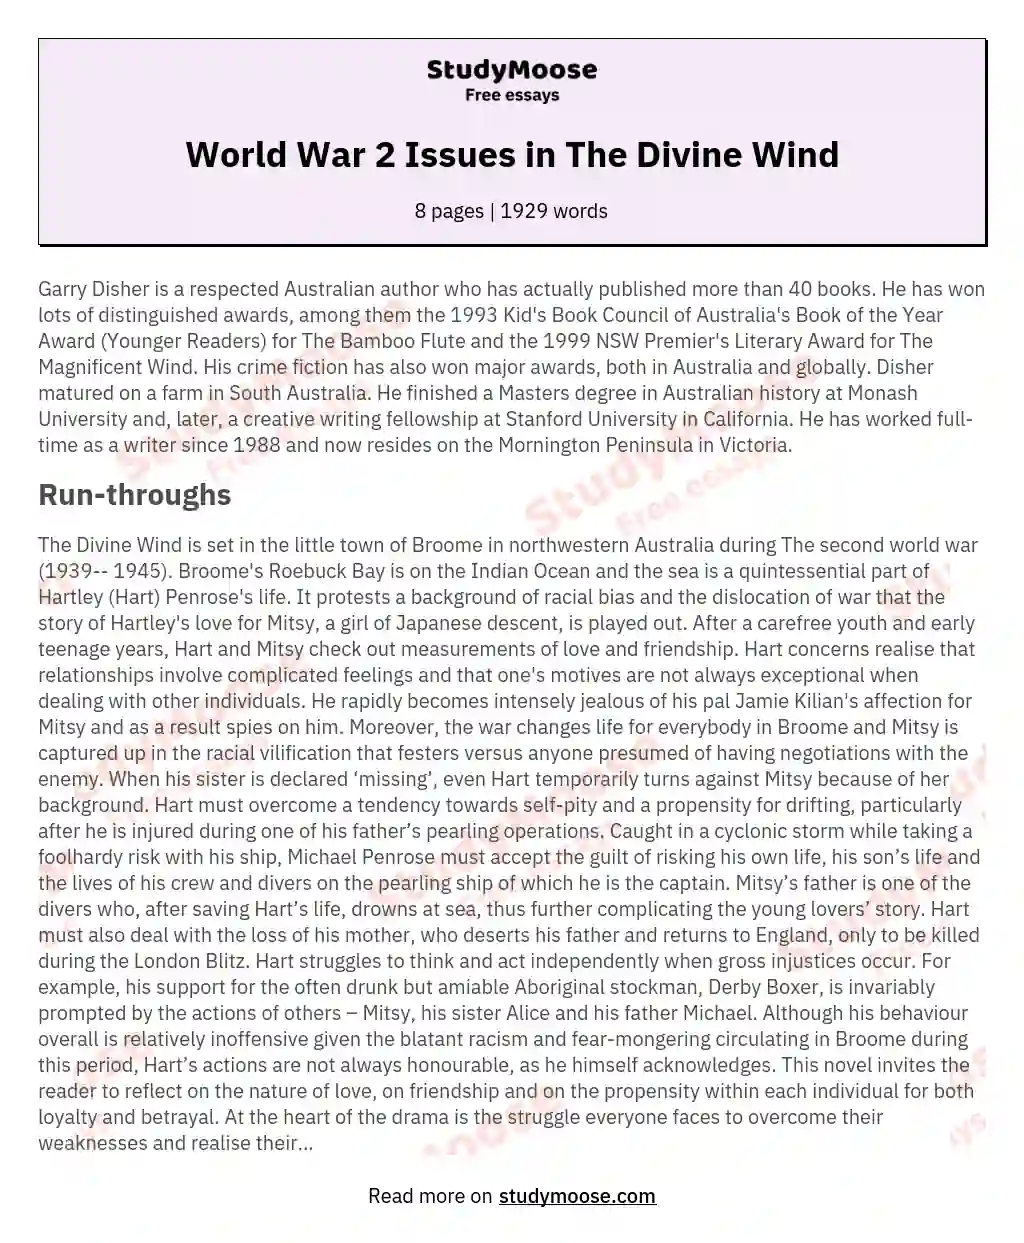 World War 2 Issues in The Divine Wind essay